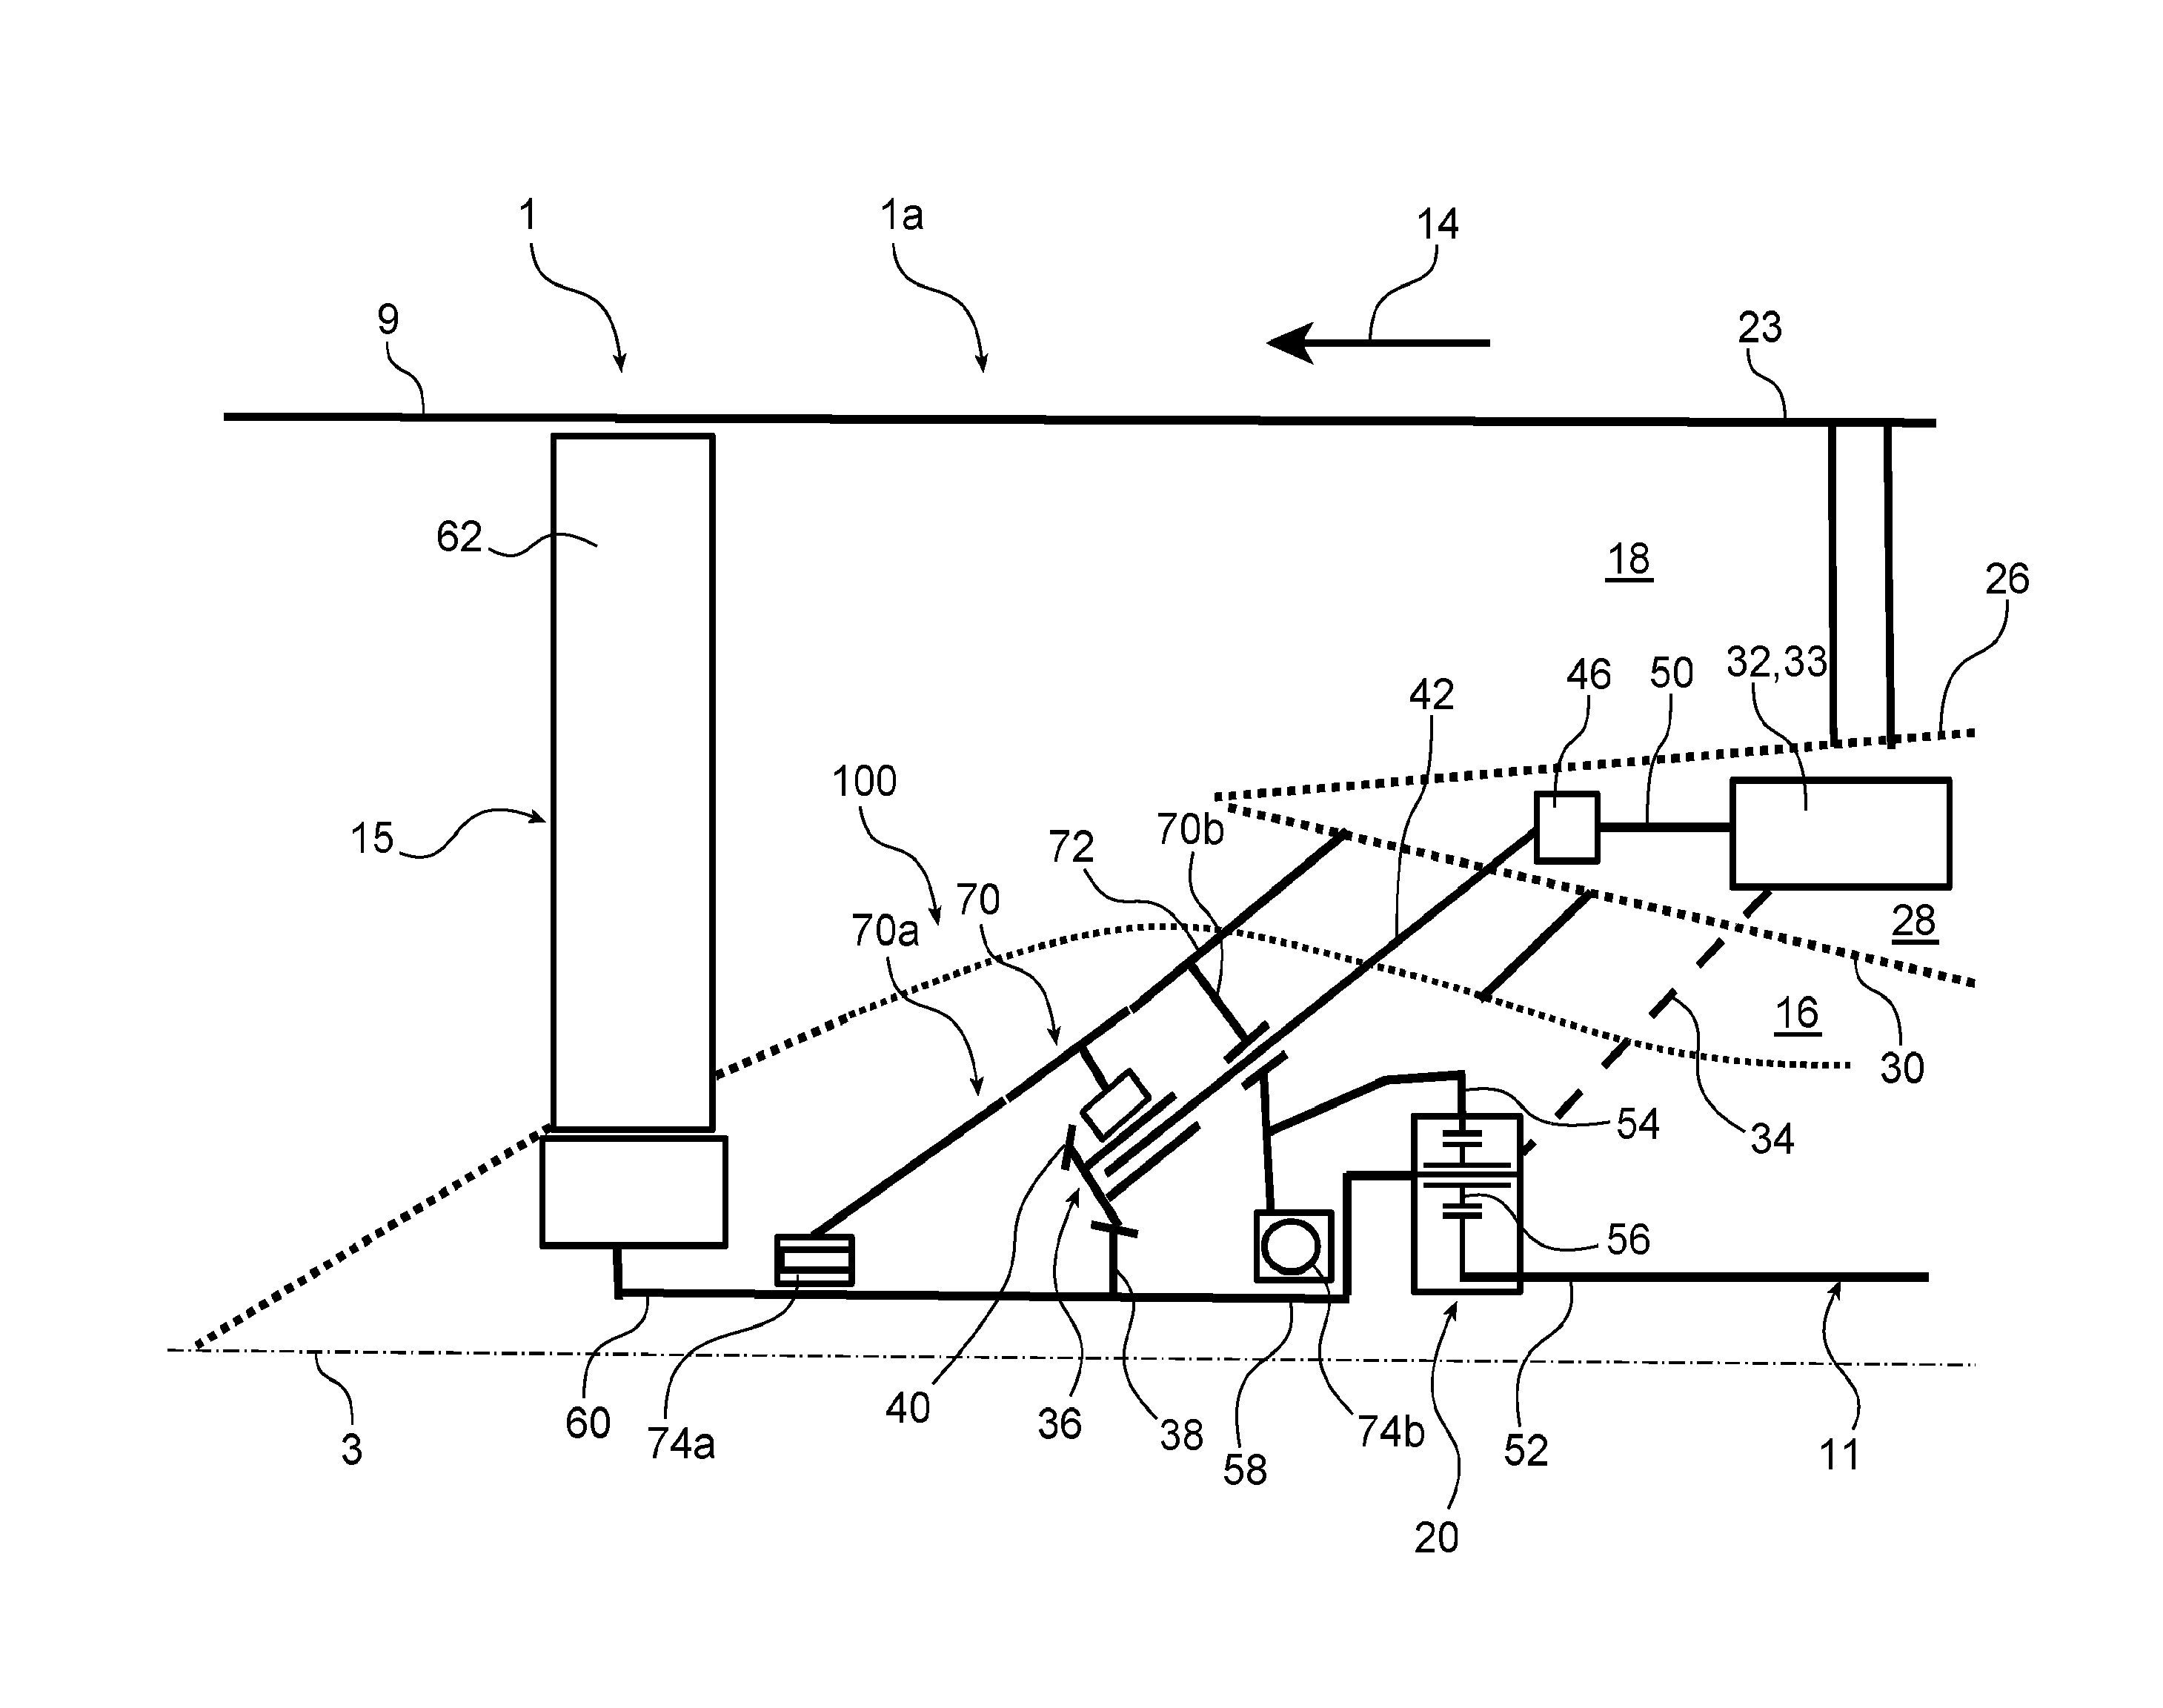 Aircraft turbine engine with improved mechanical power takeoff